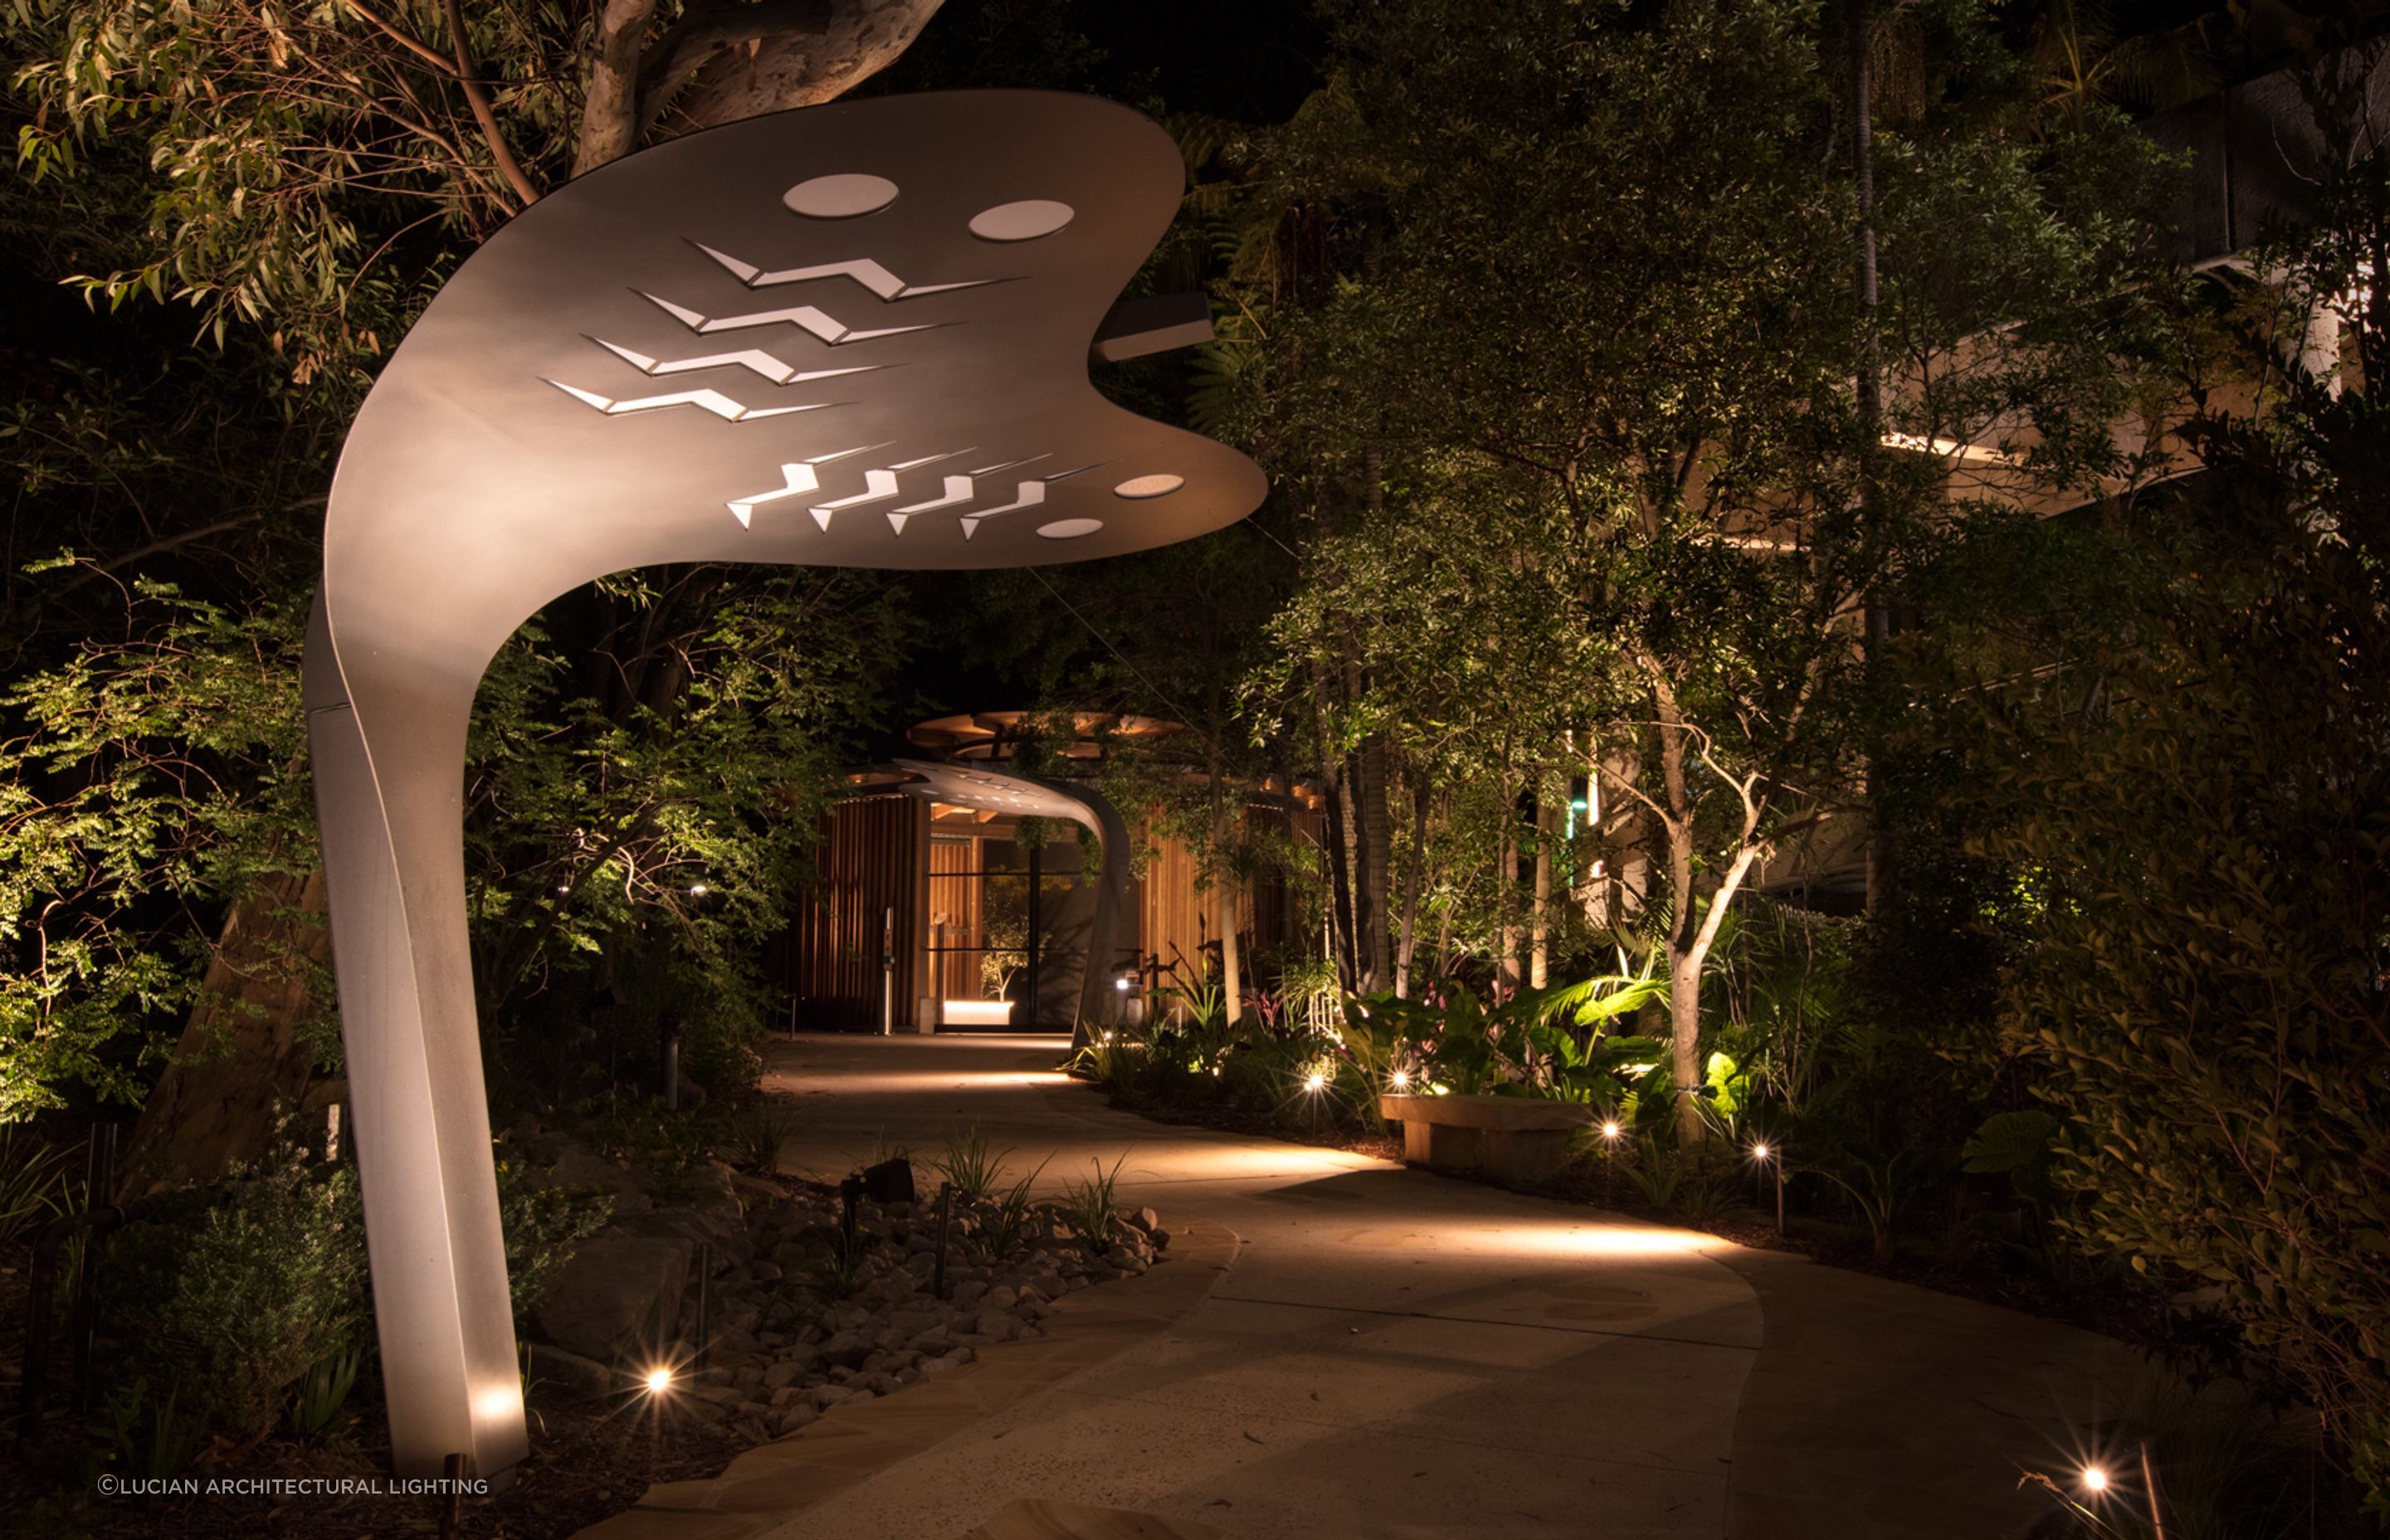 For stylish hardscape lighting it's hard to beat options like the Nocturnal Twiggy Spike Garden Light